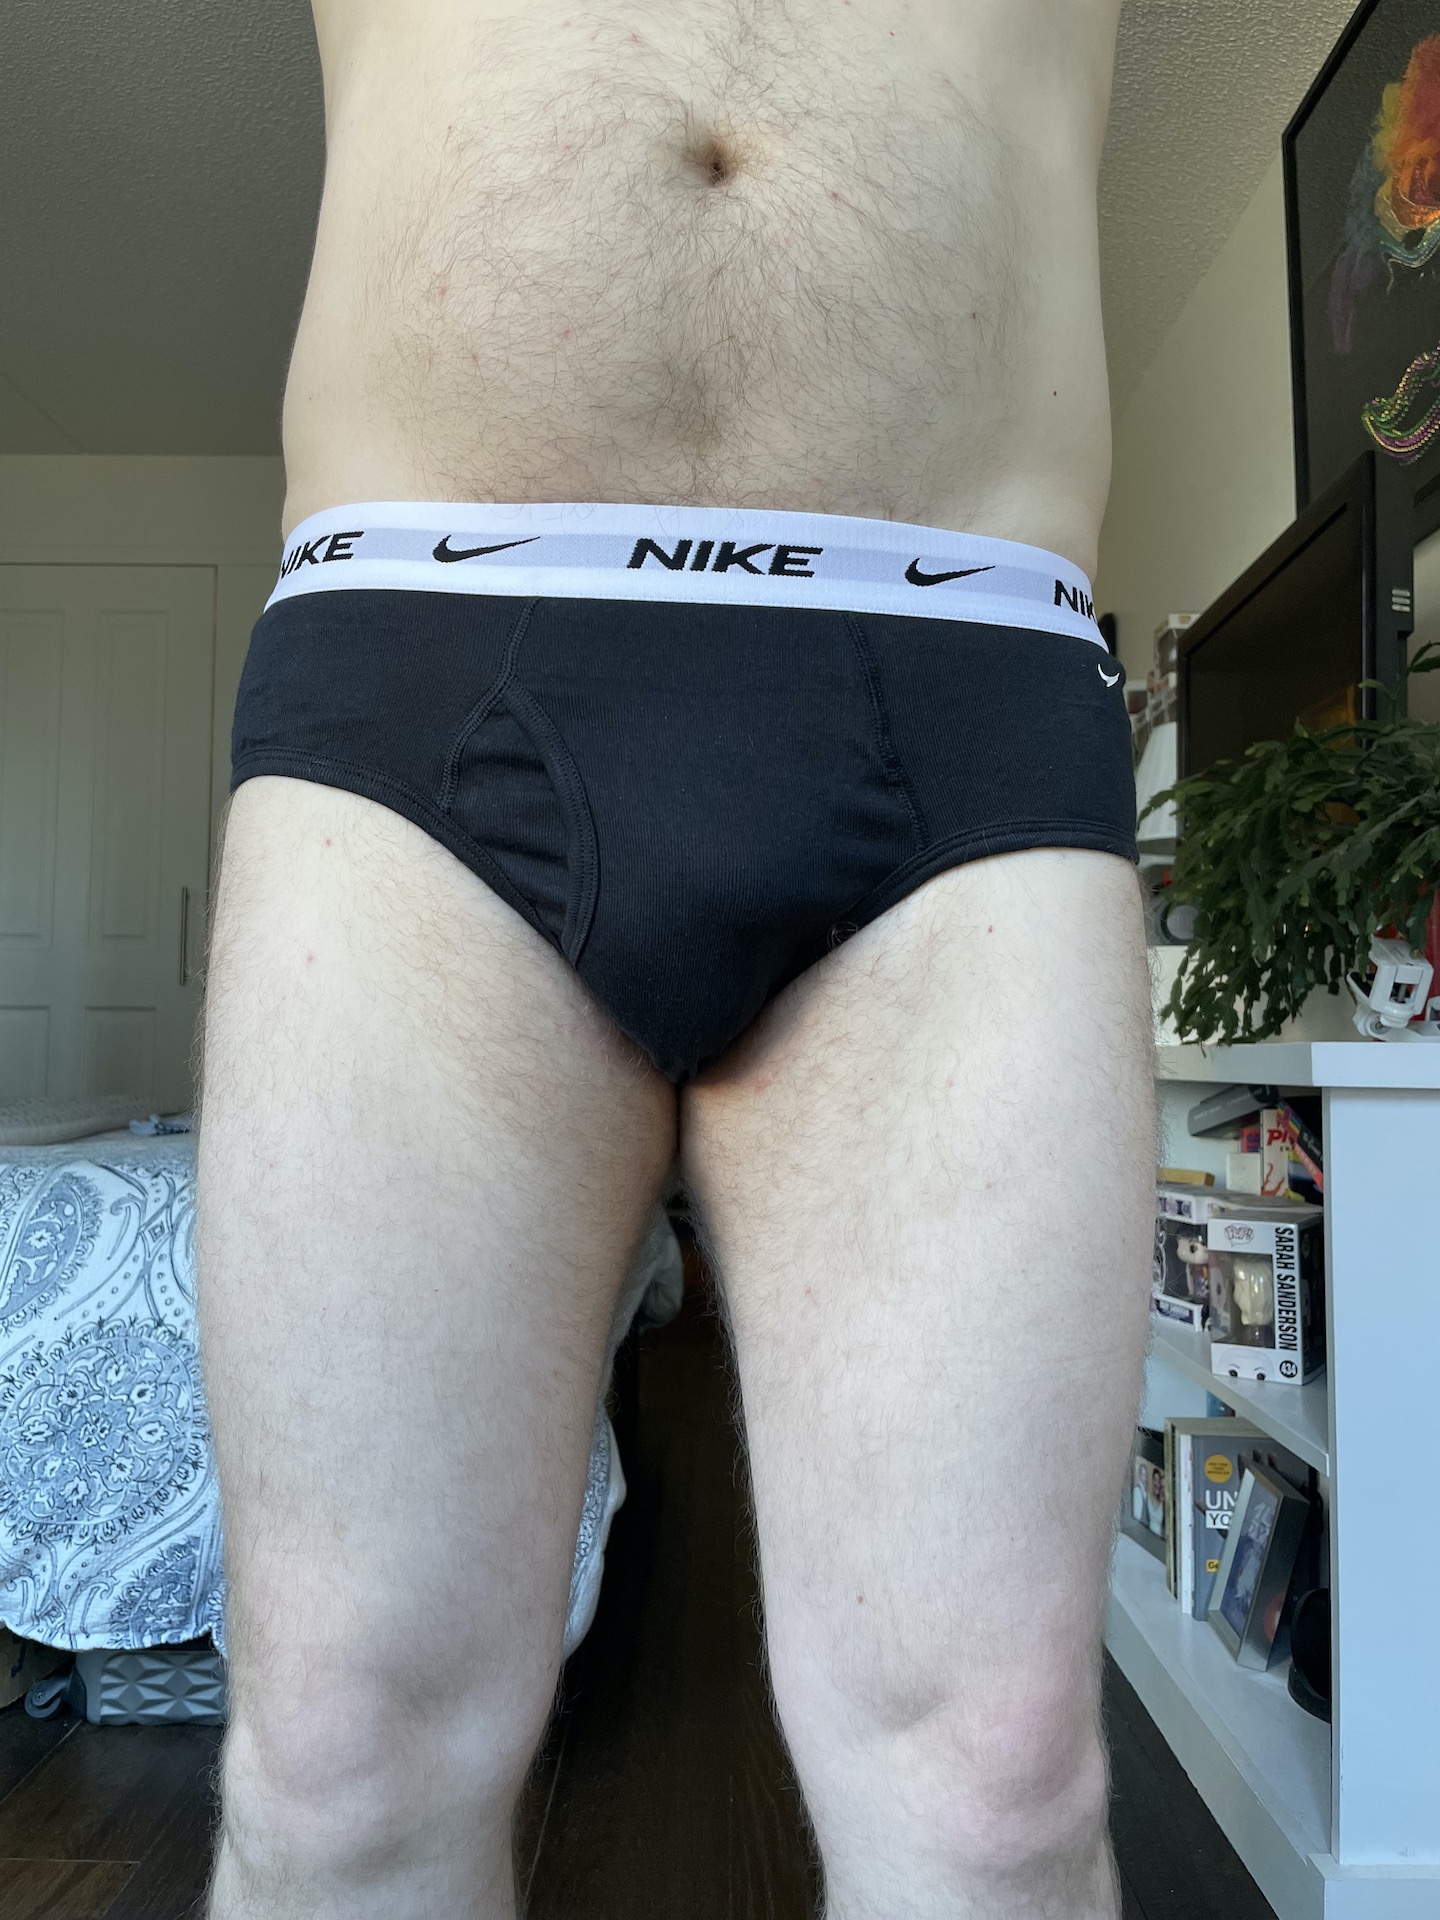 Unlikely briefs brand for today…